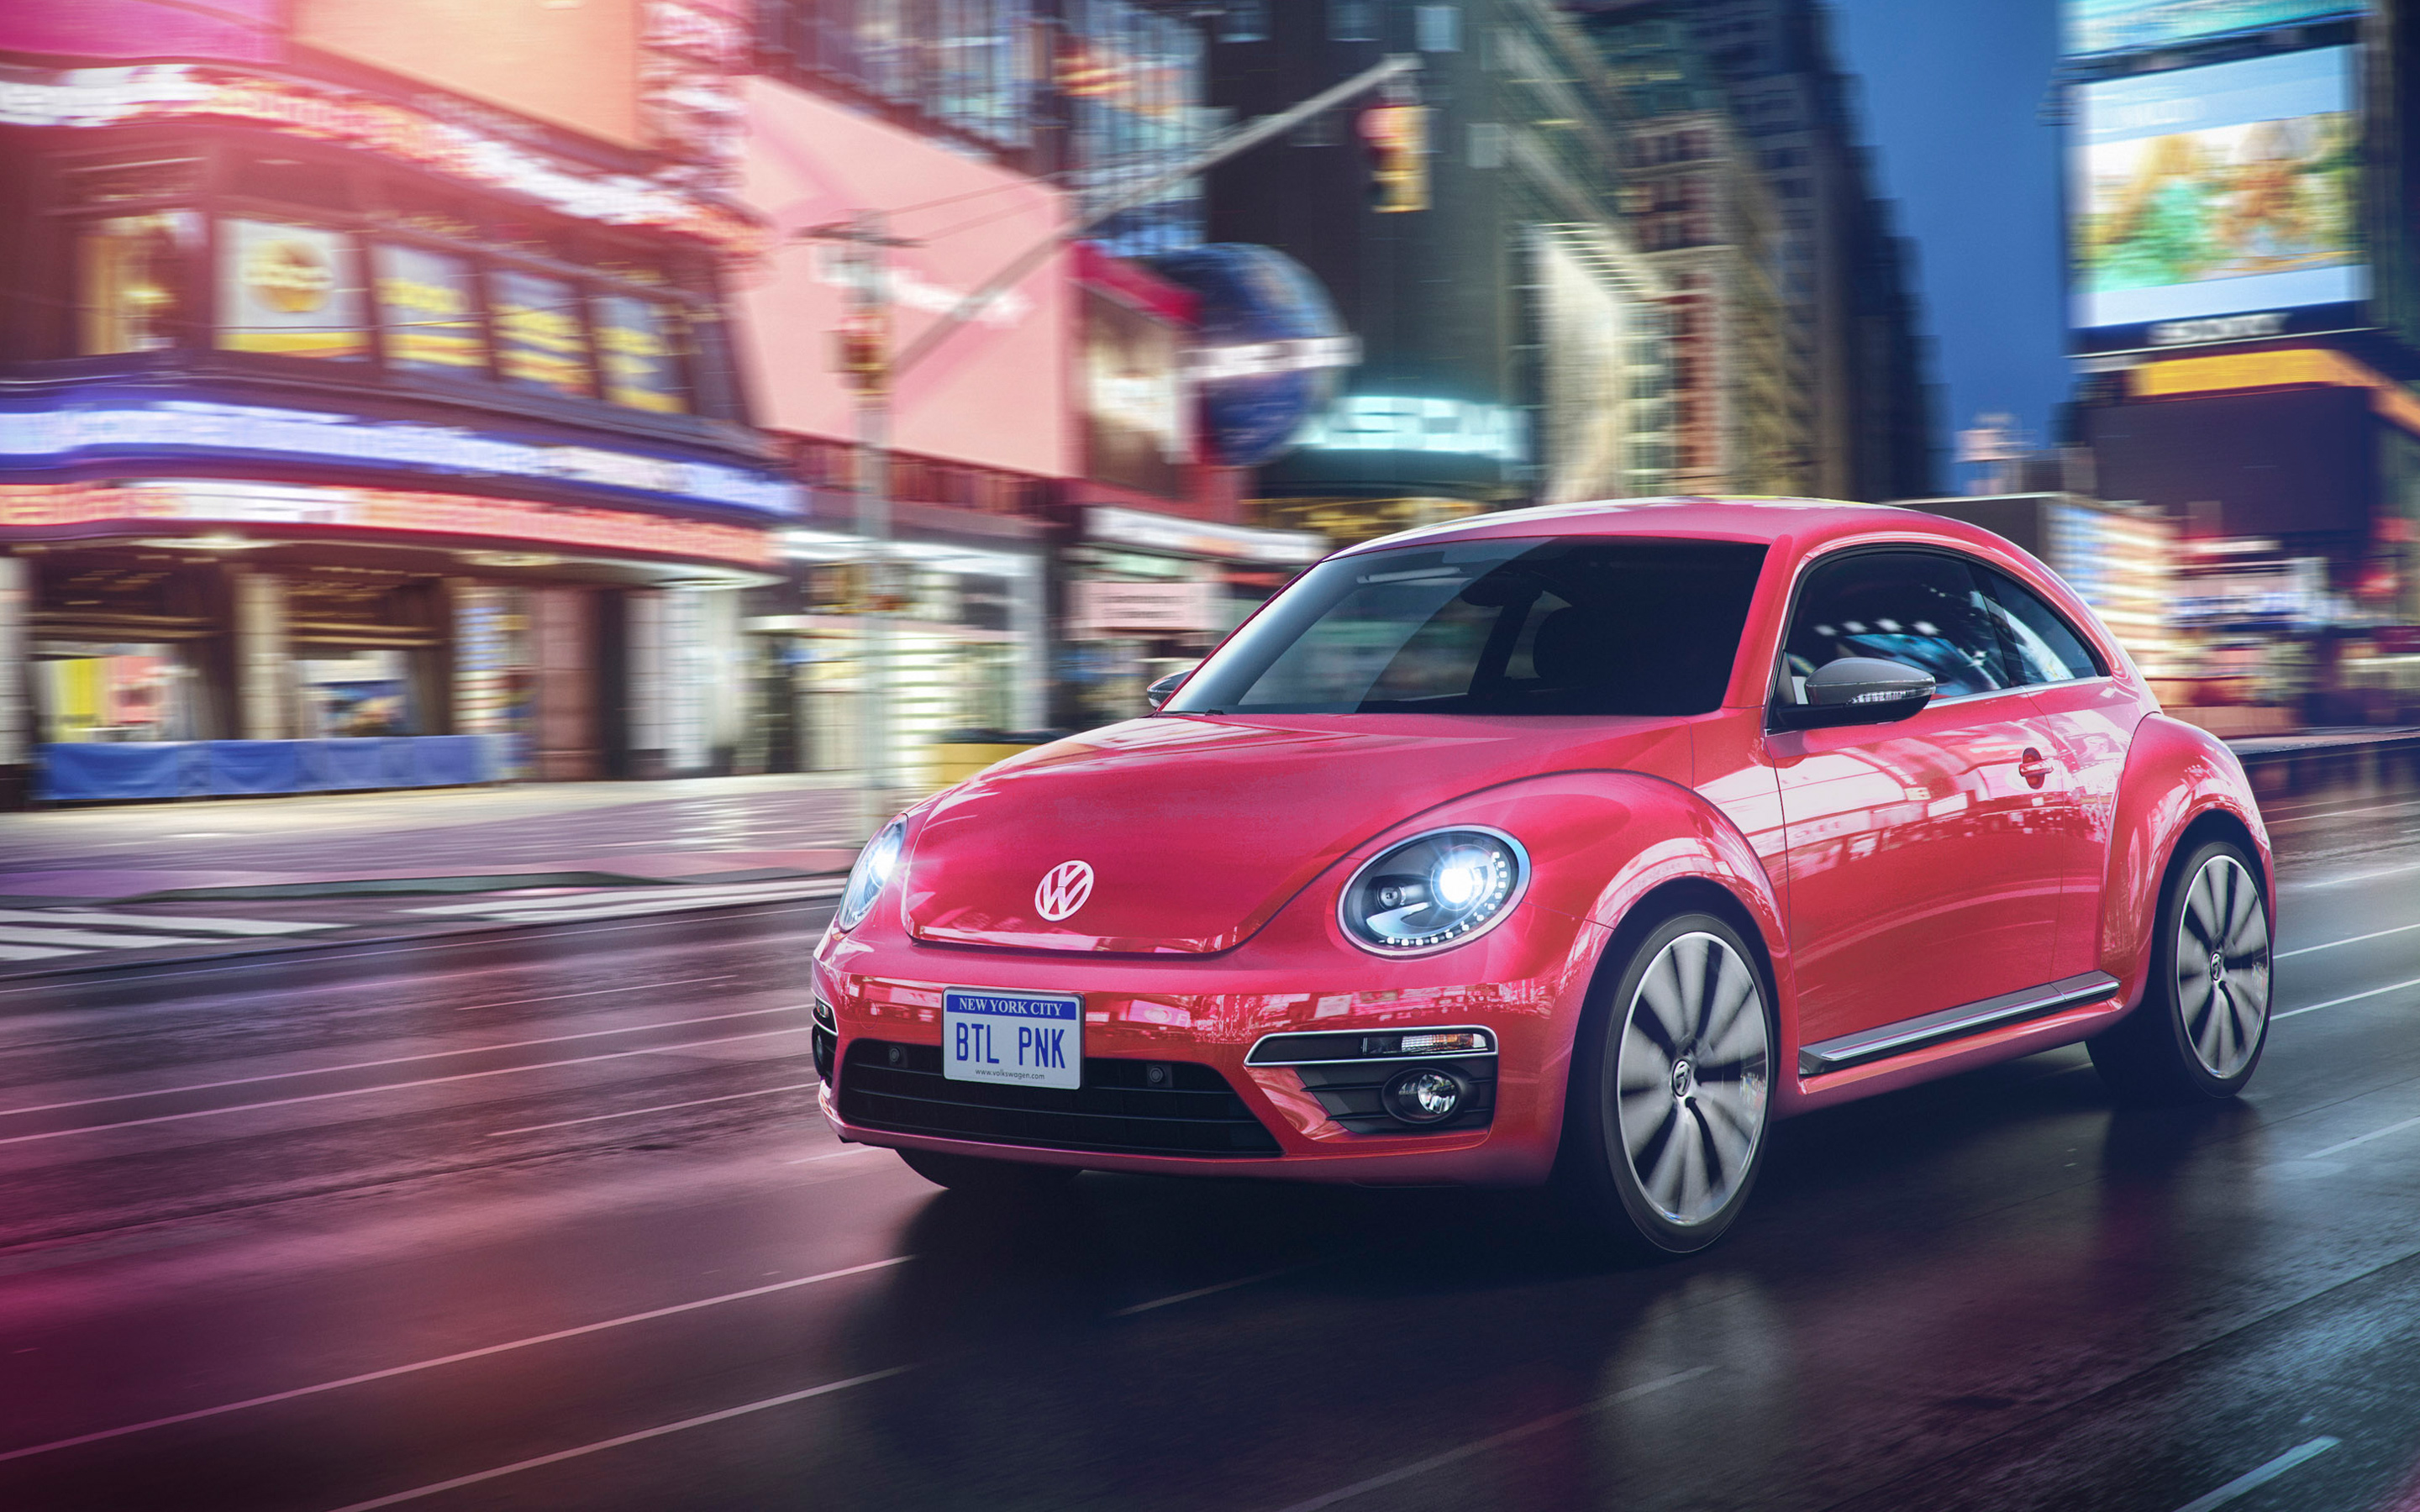 2017 Volkswagen Pink Beetle Limited Edition Wallpaper - Volkswagen Beetle 2017 Pink - HD Wallpaper 